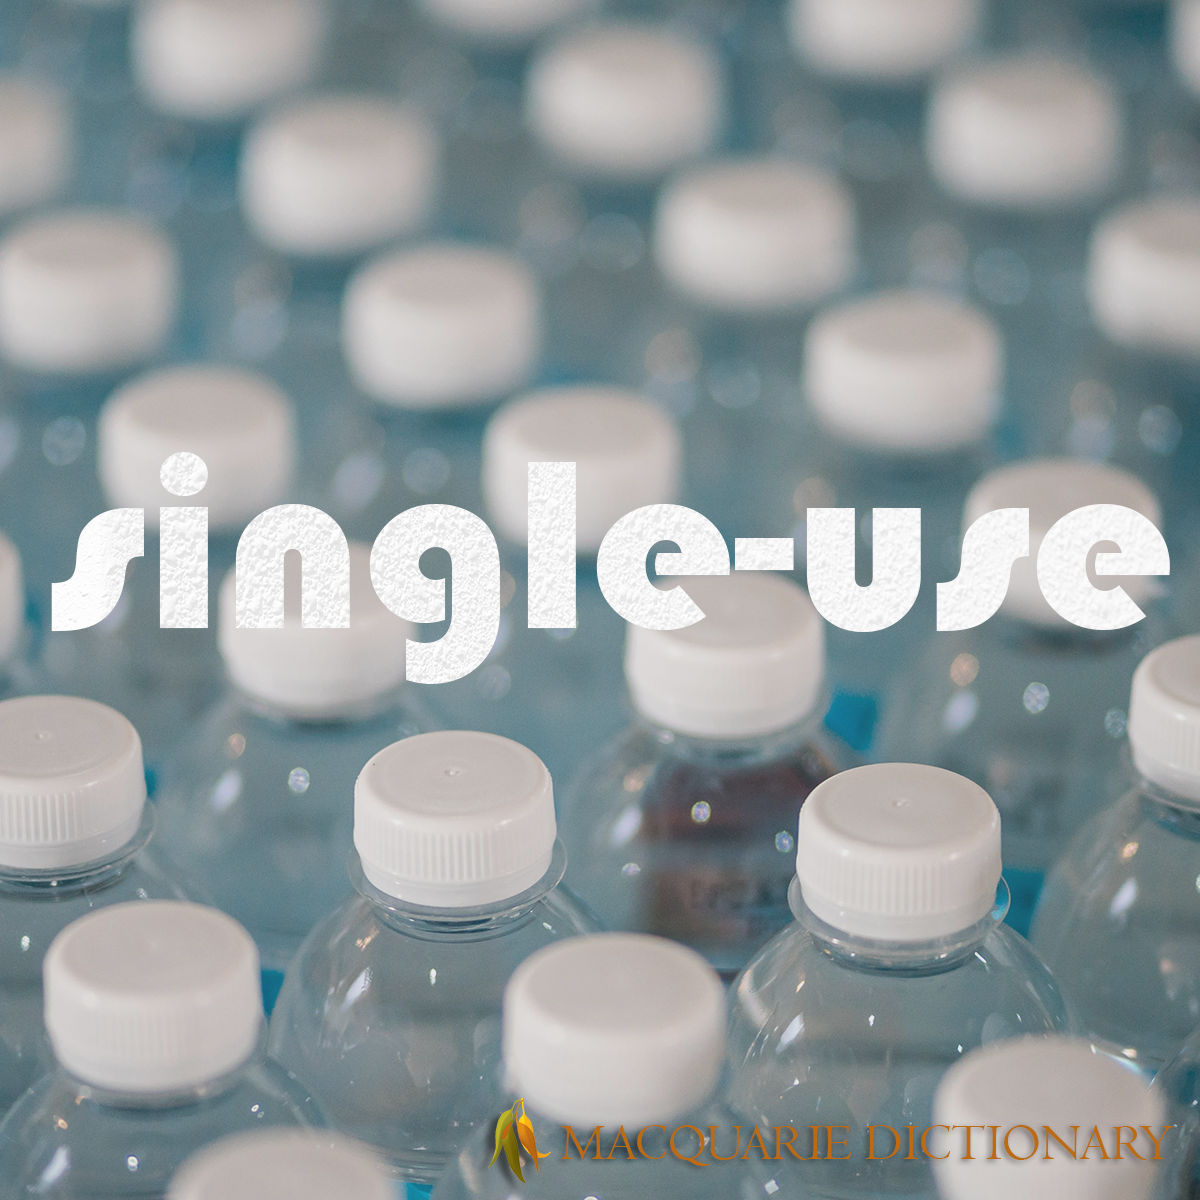 Image of Macquarie Dictionary Word of the Year - single-use - intended for disposal after only one use.